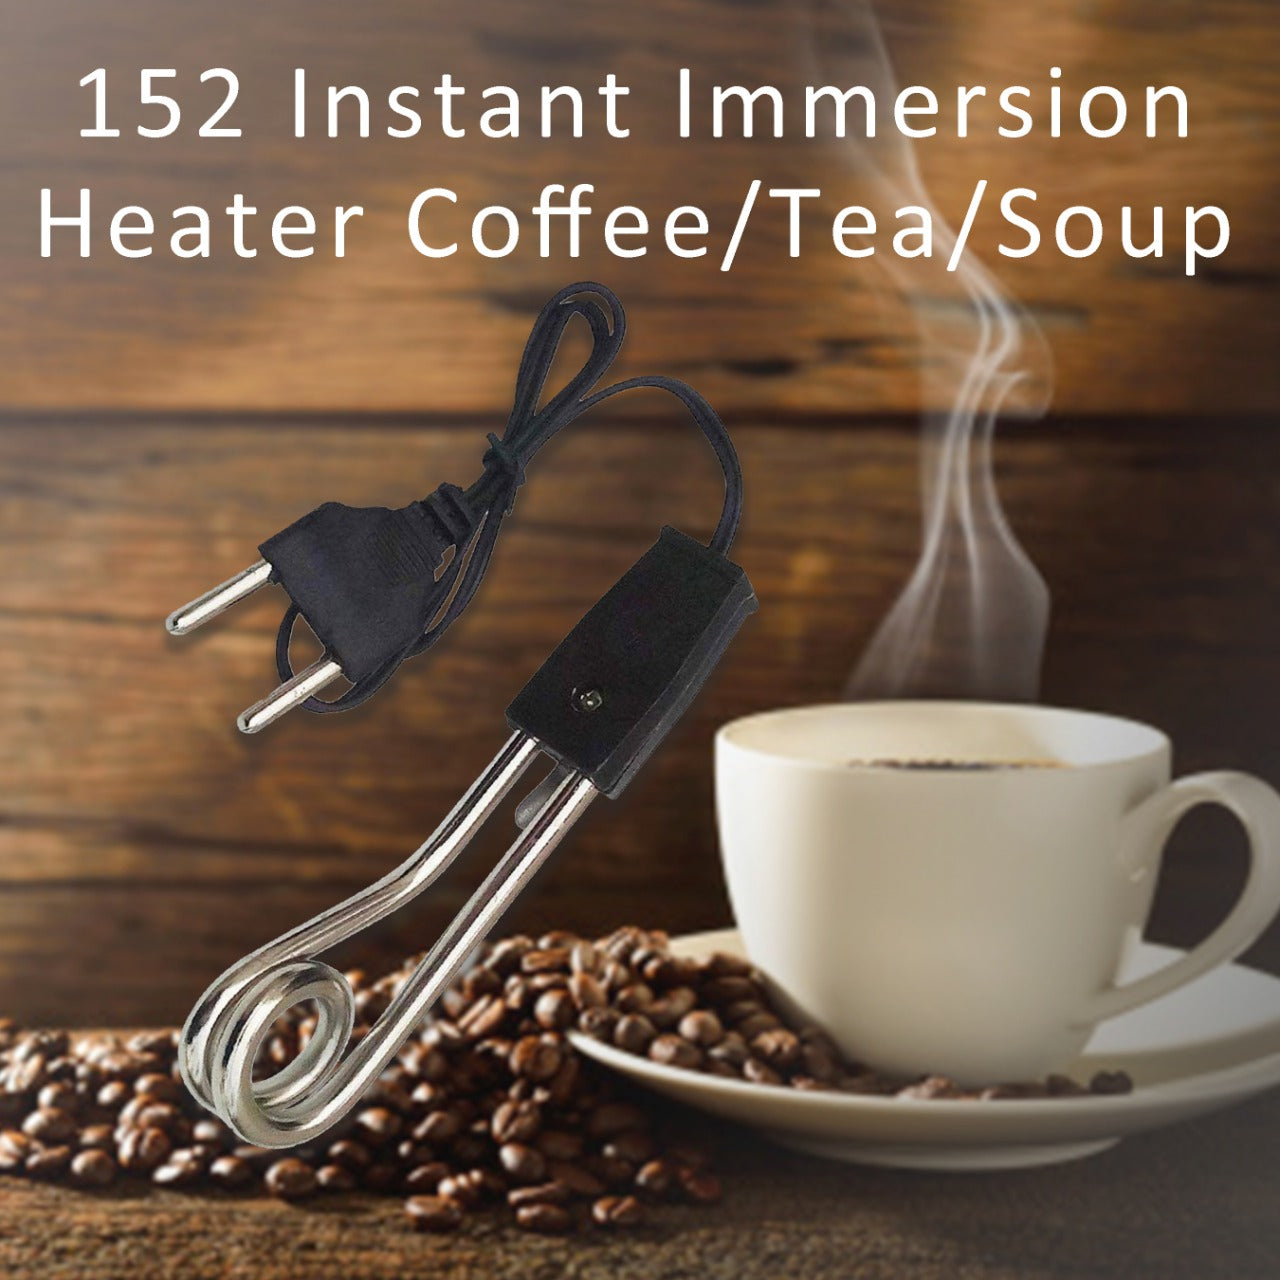 Instant Immersion Heater Coffee/Tea/Soup